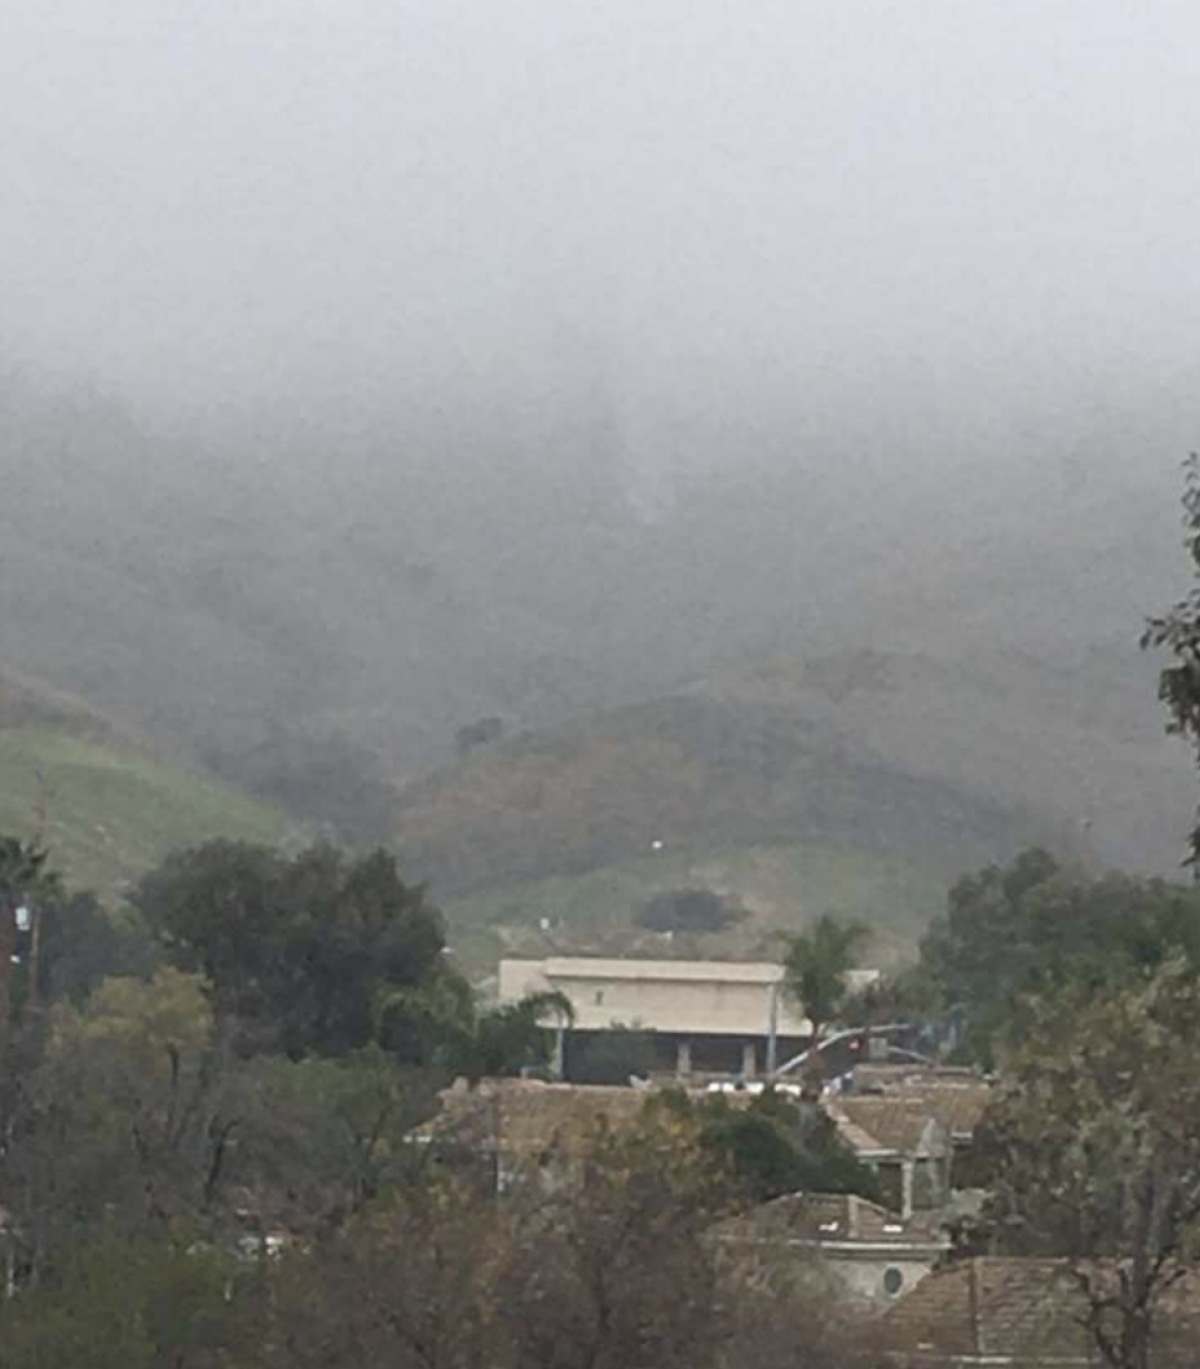 A photo from a resident shows fog near the crash site.